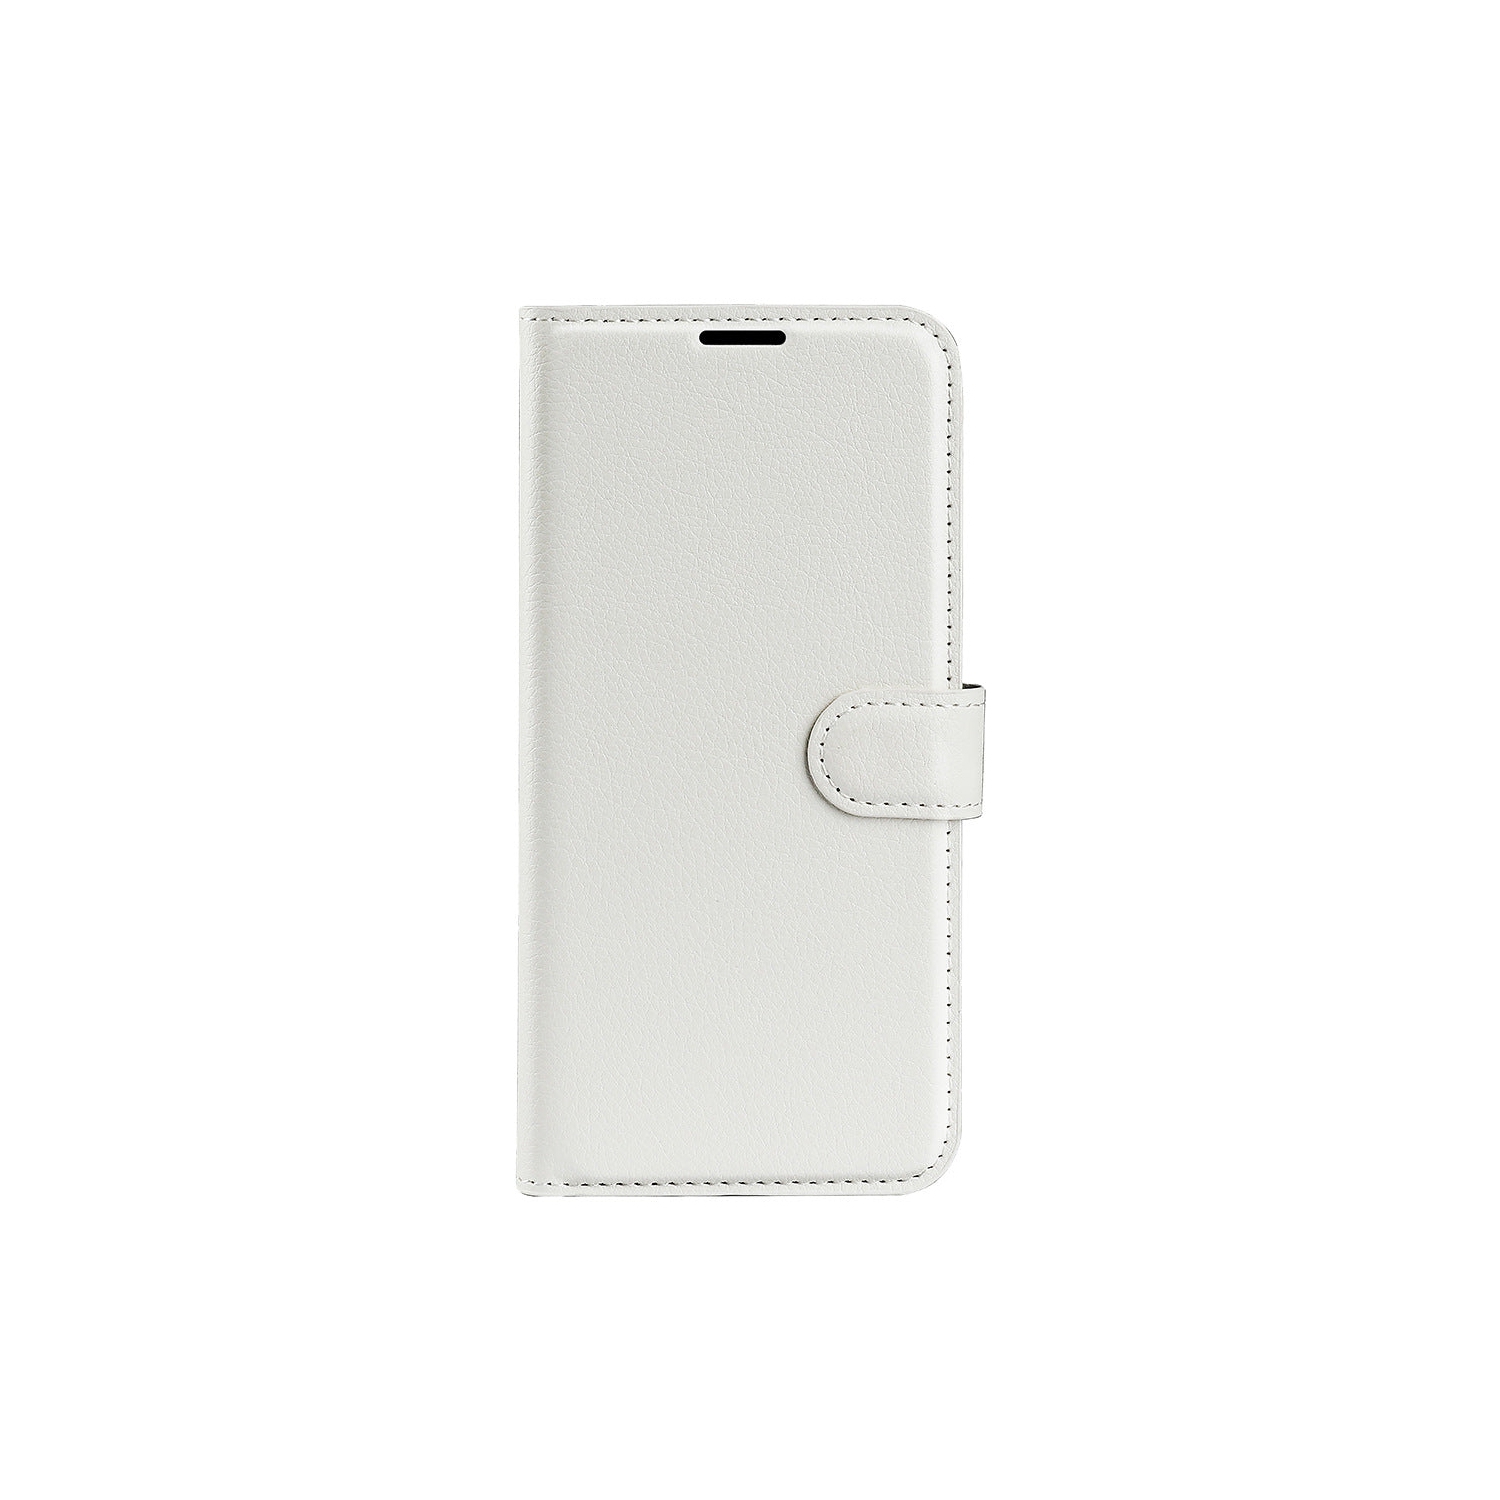 PANDACO White Leather Wallet Case for Google Pixel 6